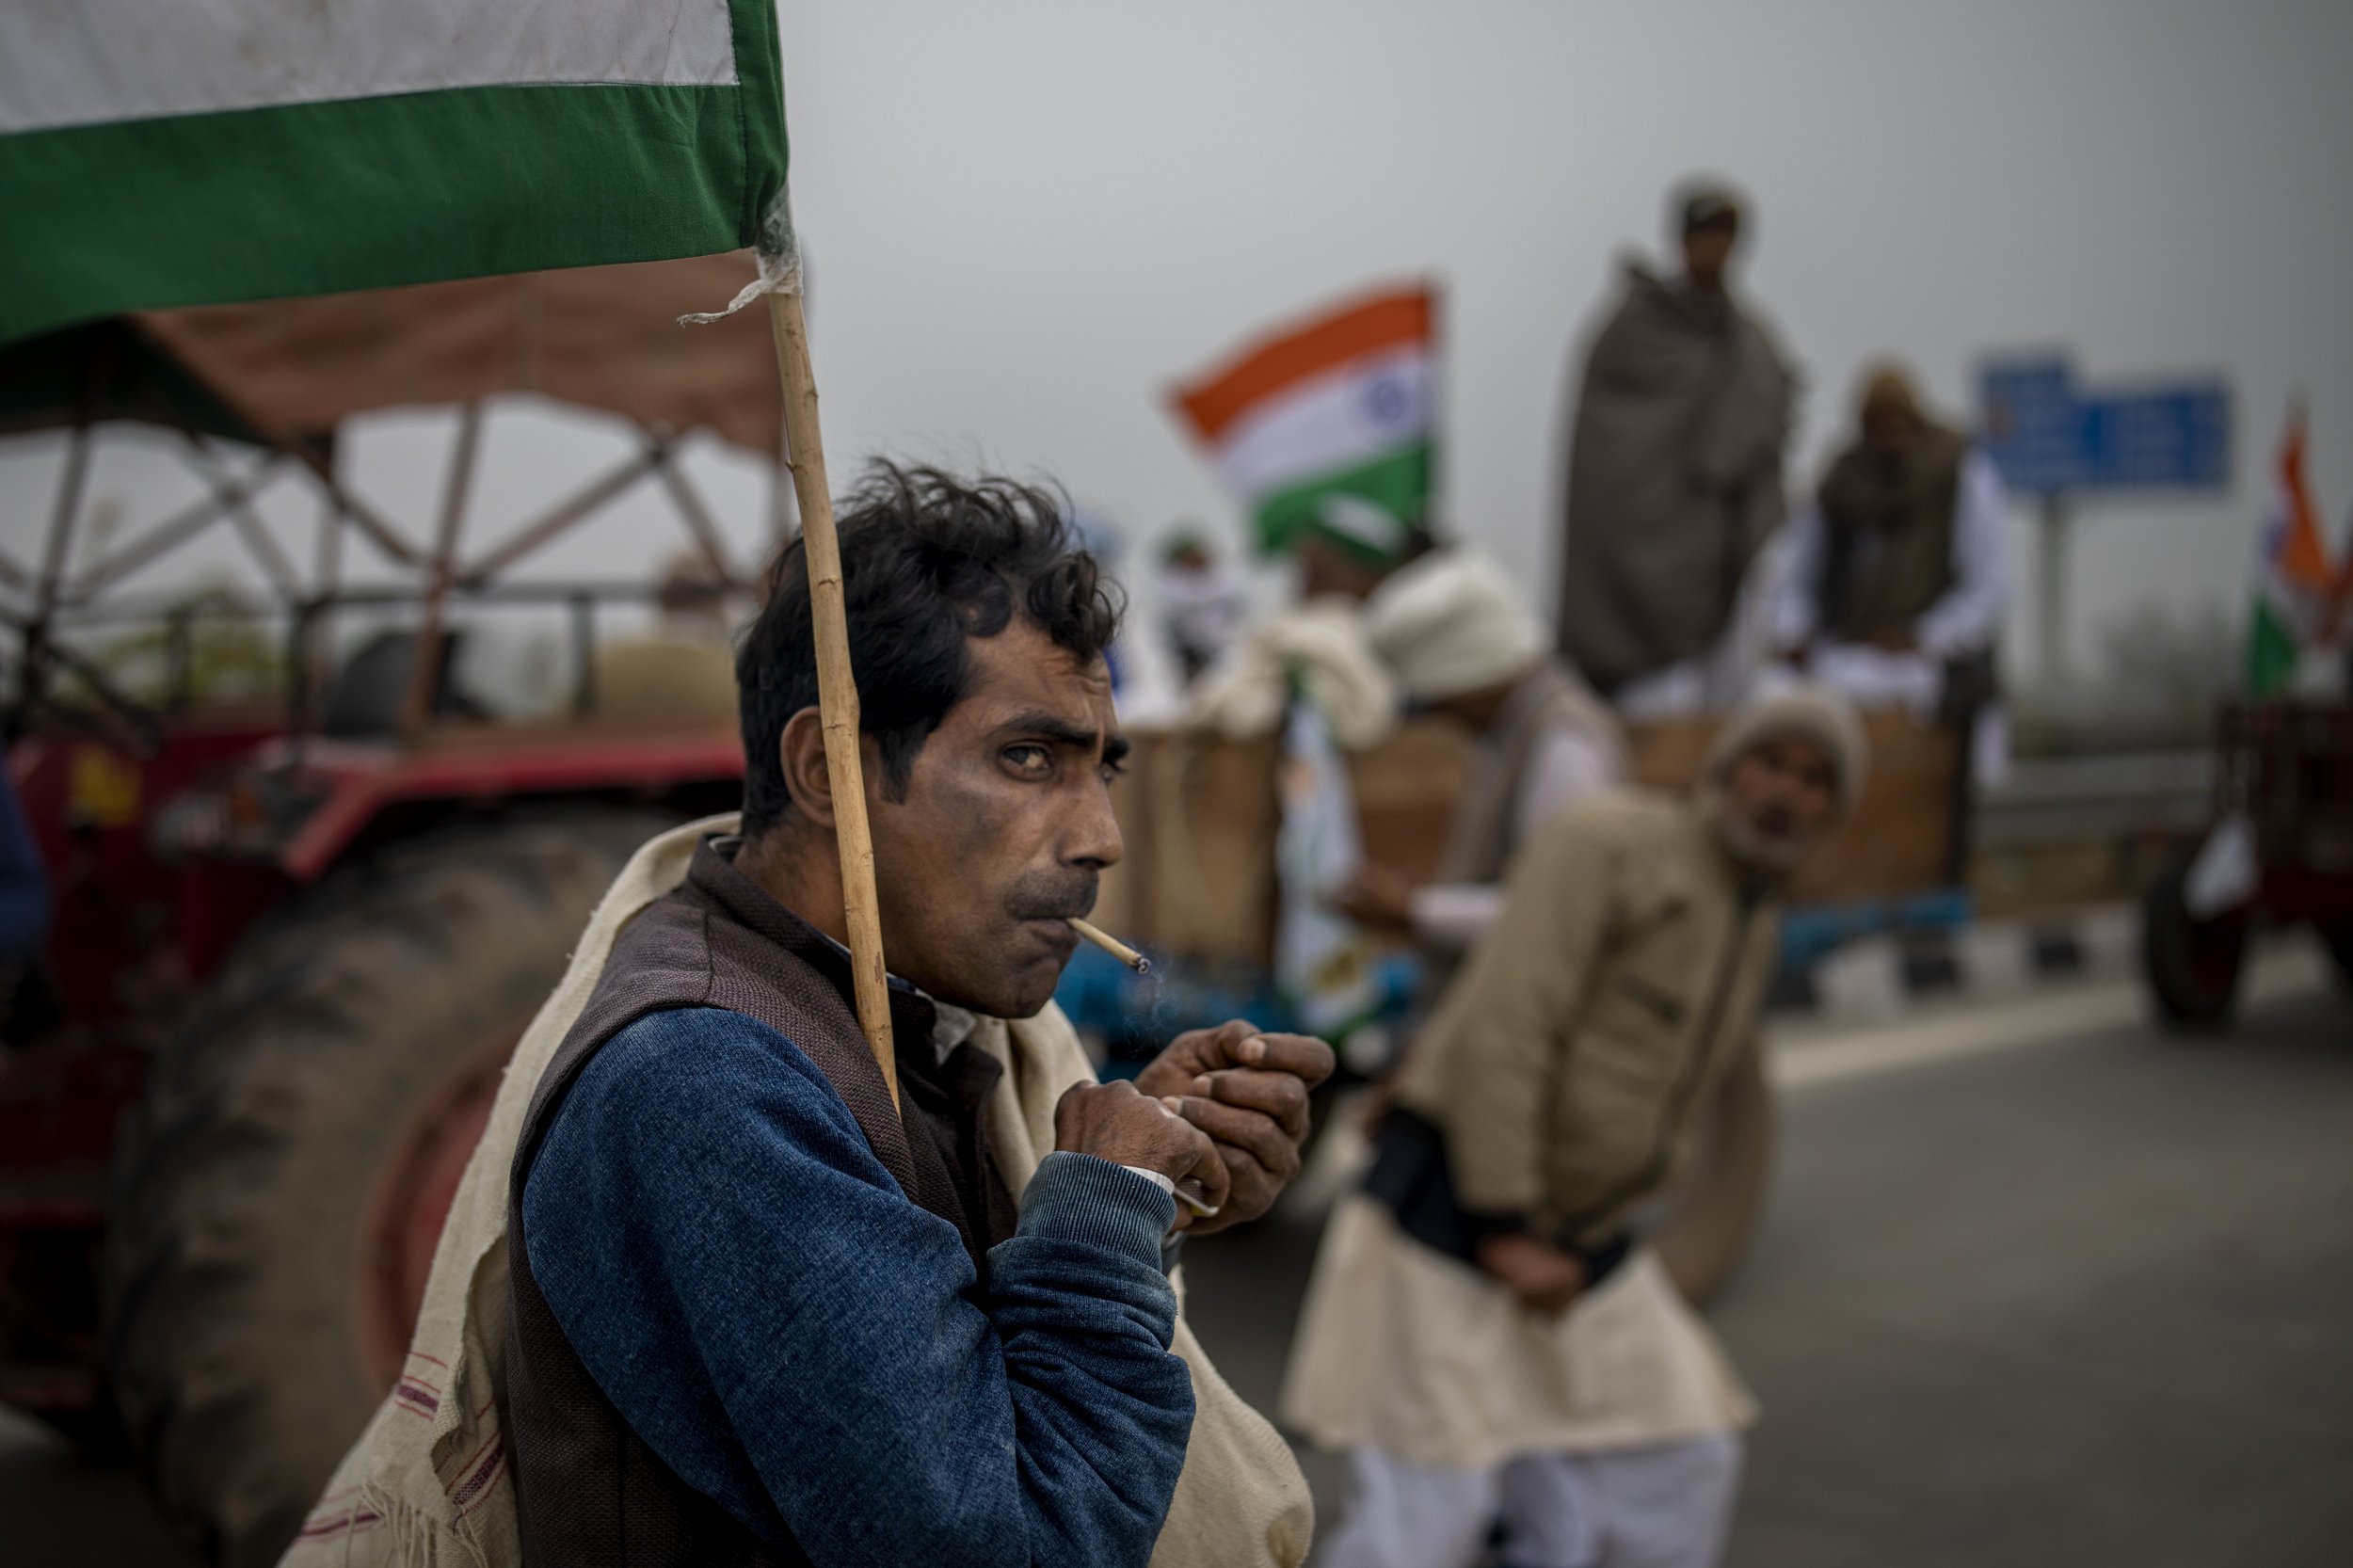  A farmer smokes a bidi, or hand-rolled cigarette, during a tractor rally to protest new farm laws in Ghaziabad, on the outskirts of New Delhi, India, on Jan. 7, 2021. (AP Photo/Altaf Qadri) 